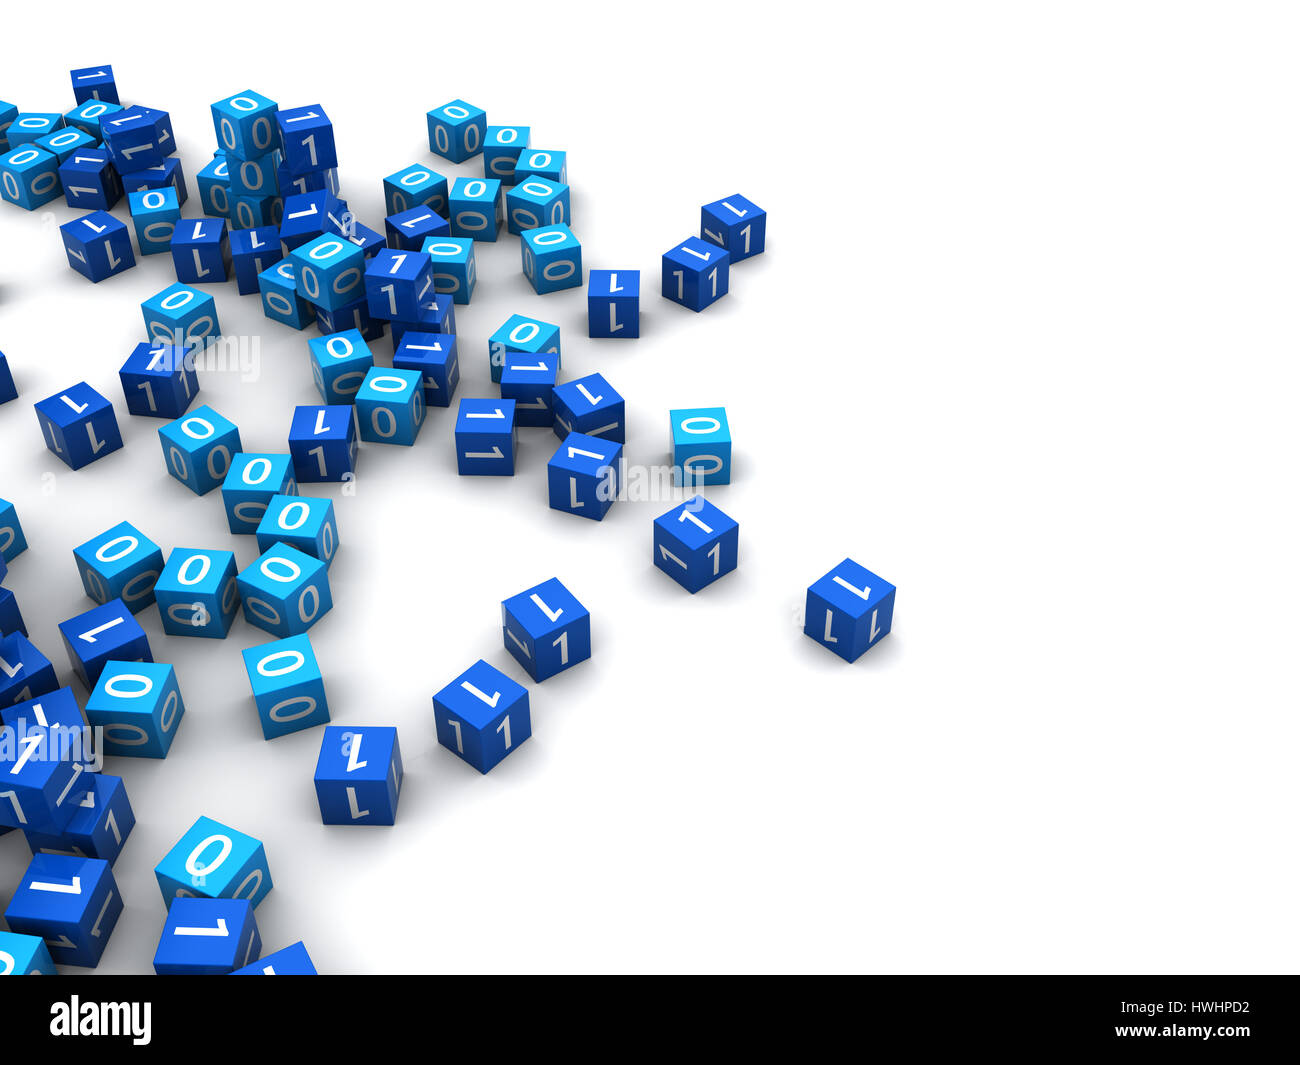 abstract 3d illustration of blue binary cubes over white background Stock Photo